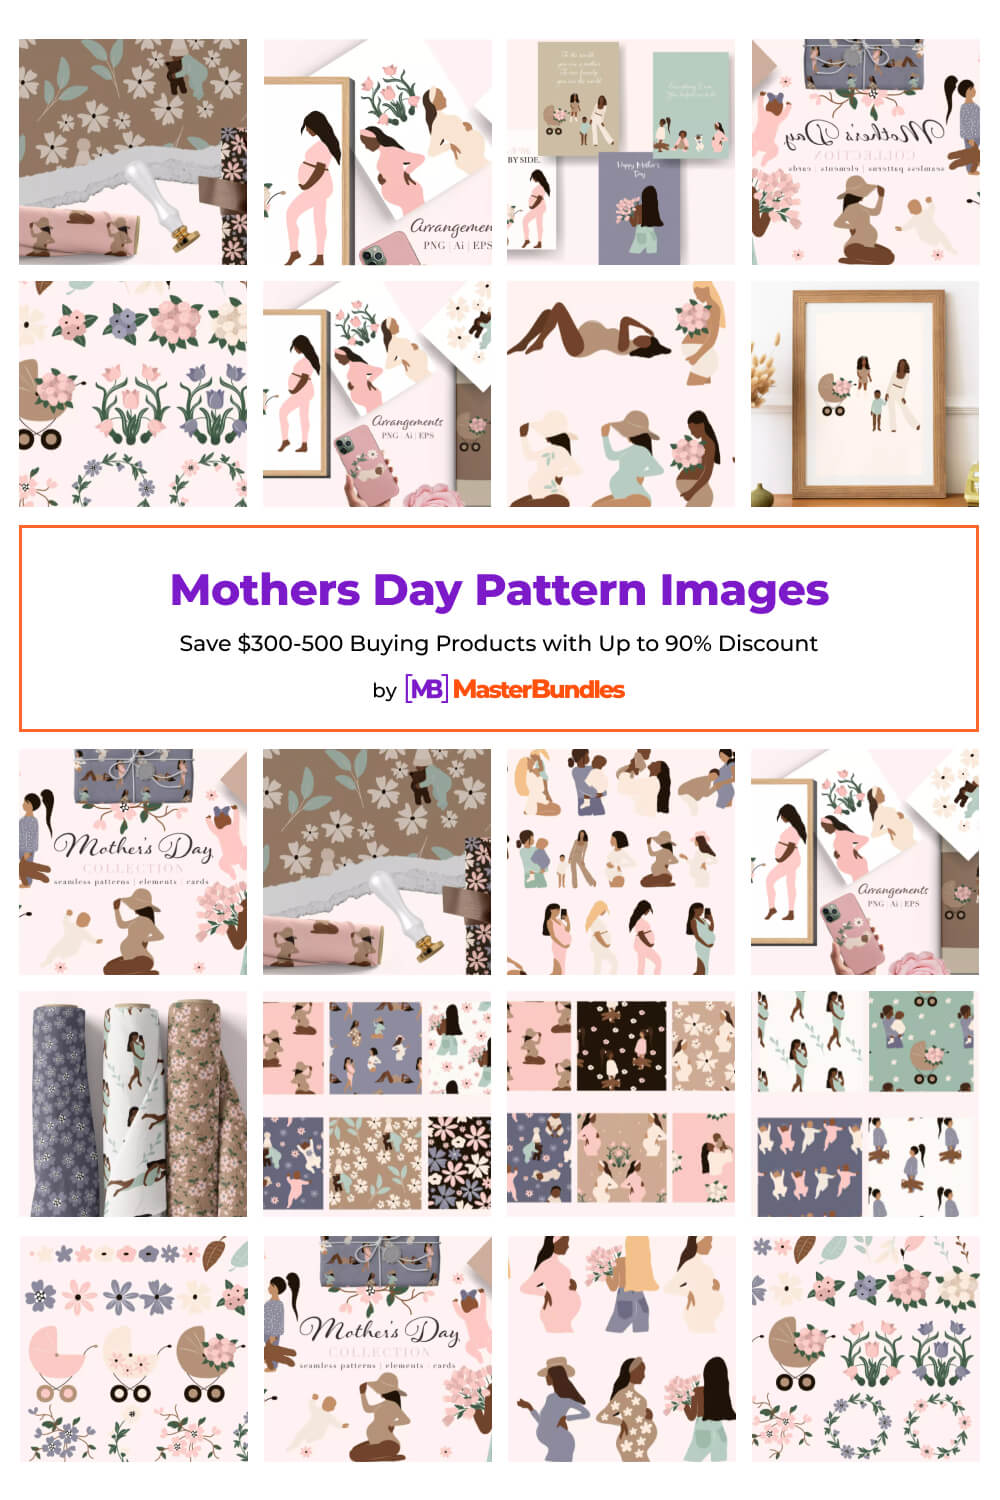 mothers day pattern images pinterest image.